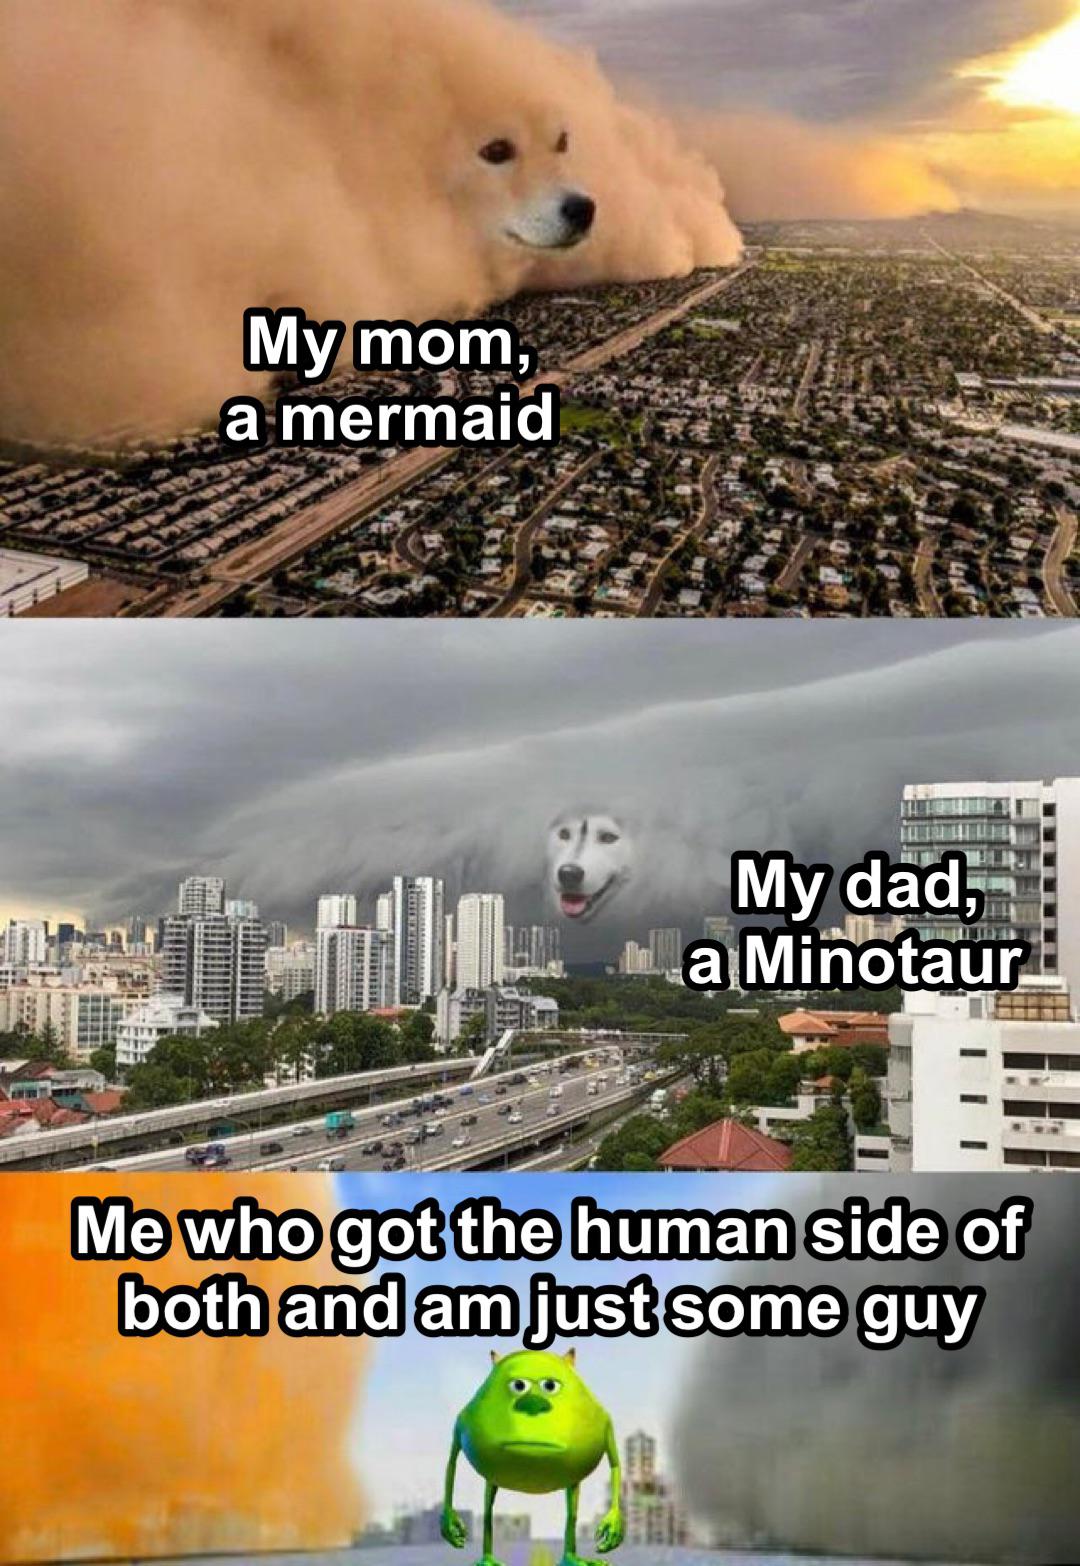 dog cloud meme template - My mom, a mermaid My dad, a Minotaur 111111111 Me who got the human side of both and am just some guy